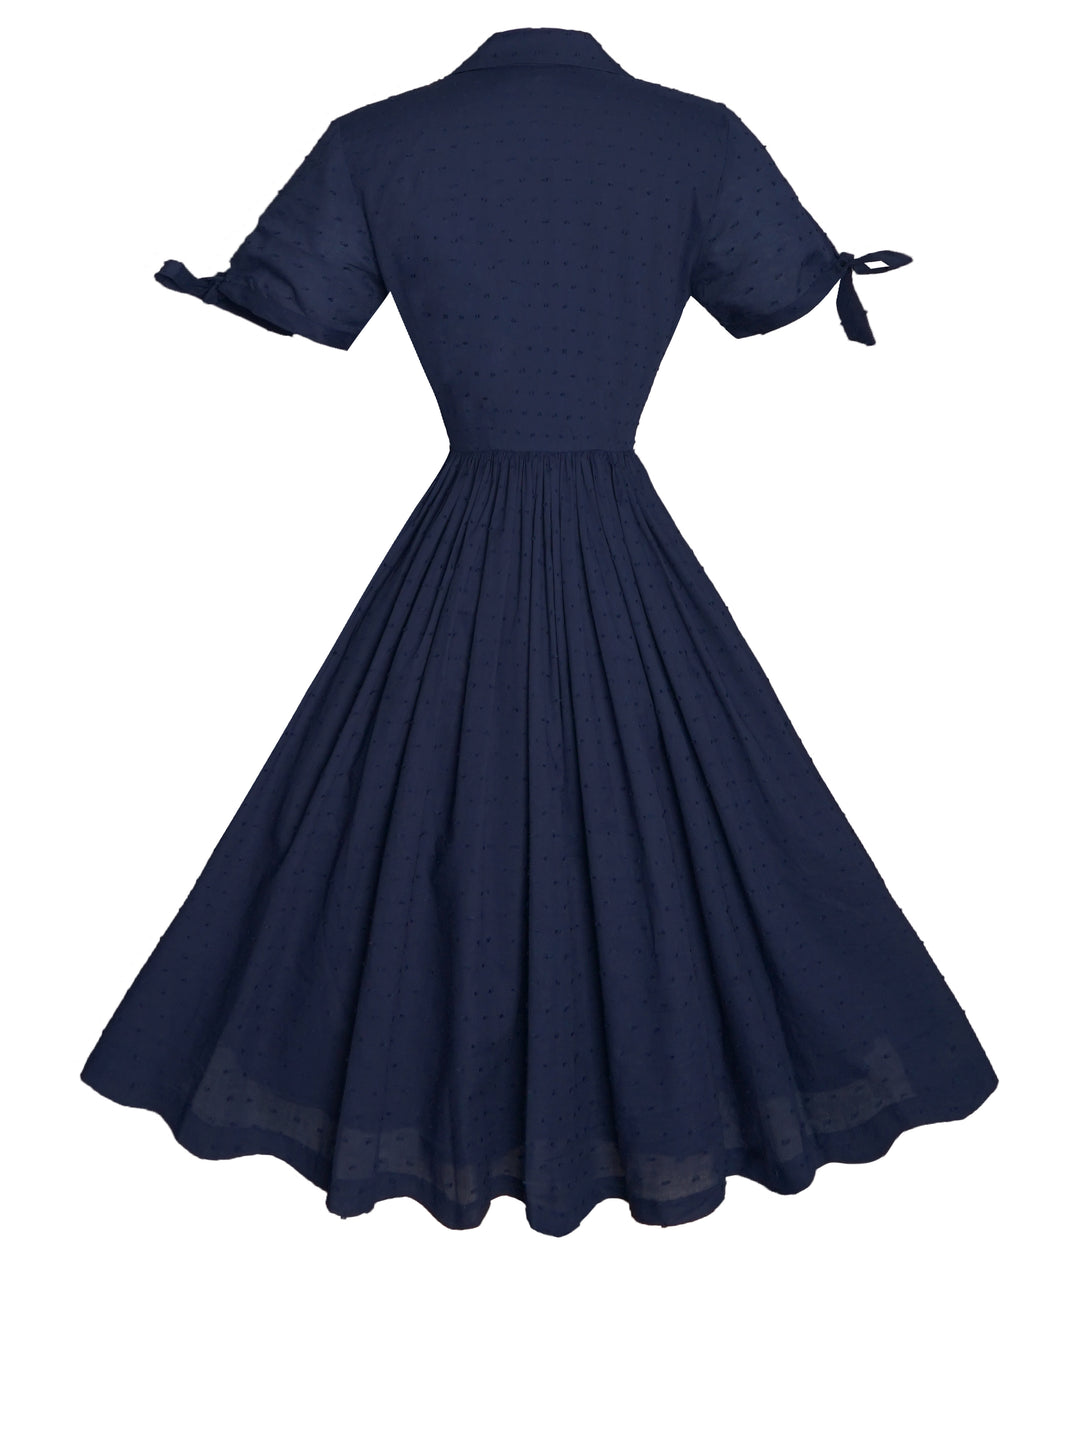 MTO - Trudie Dress in Navy Blue "Dotted Swiss"